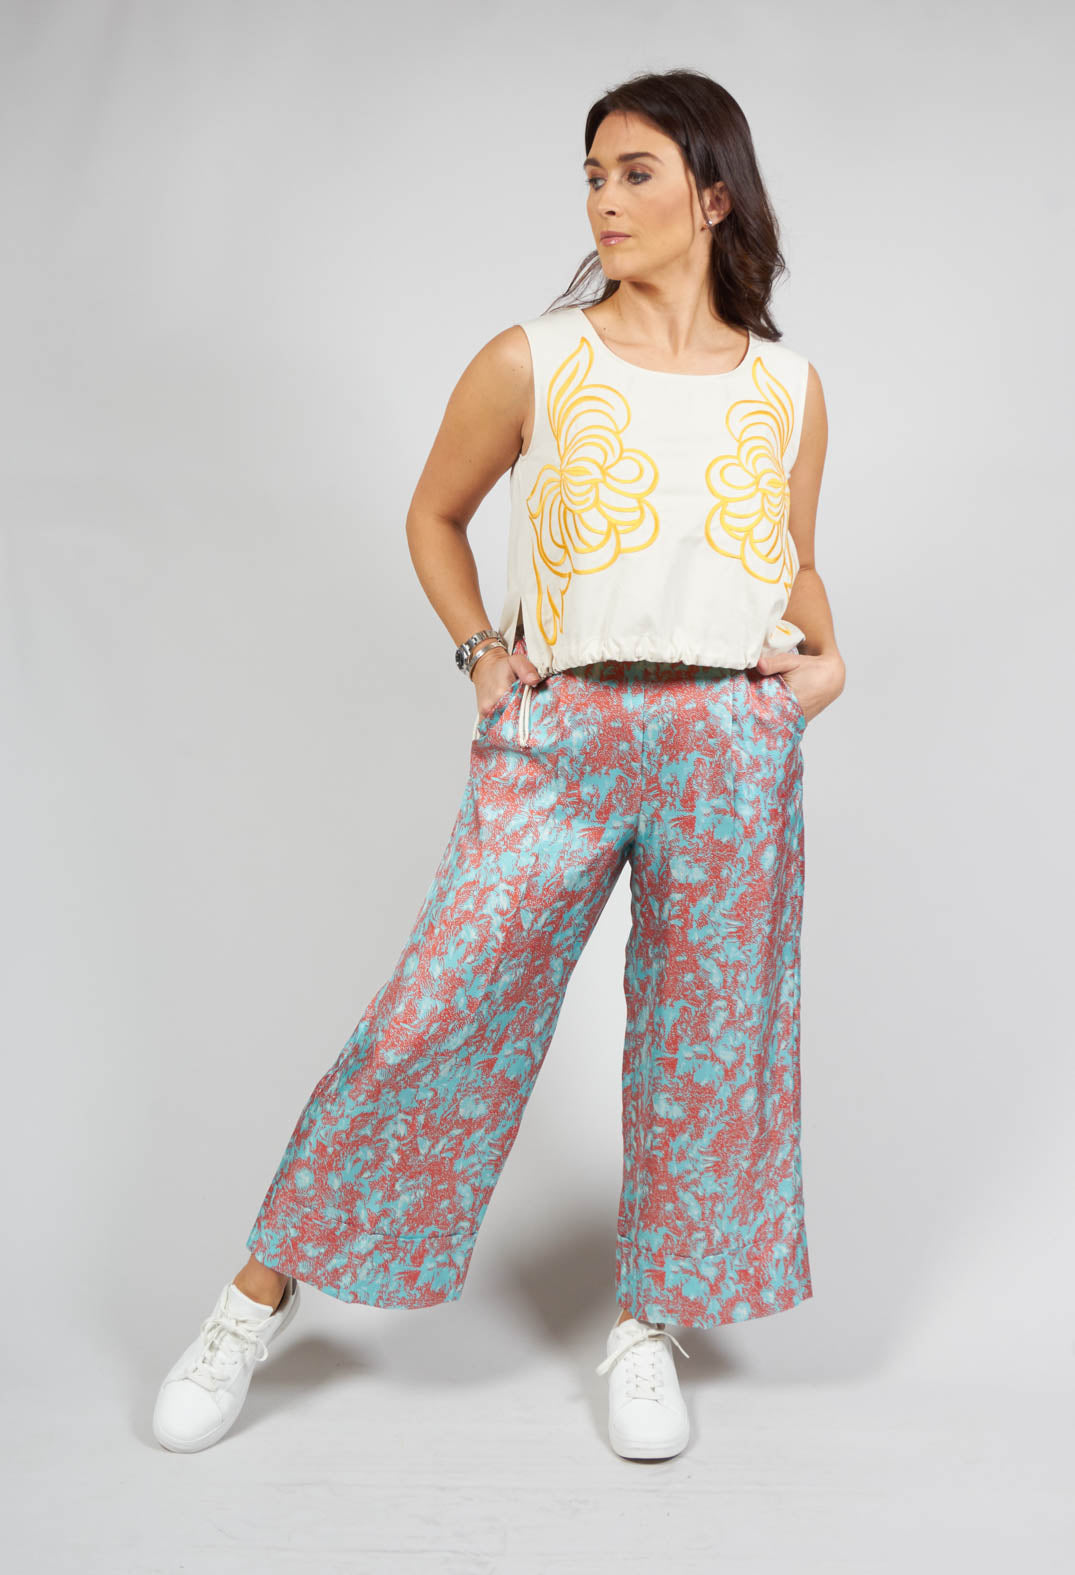 lady wearing printed culottes